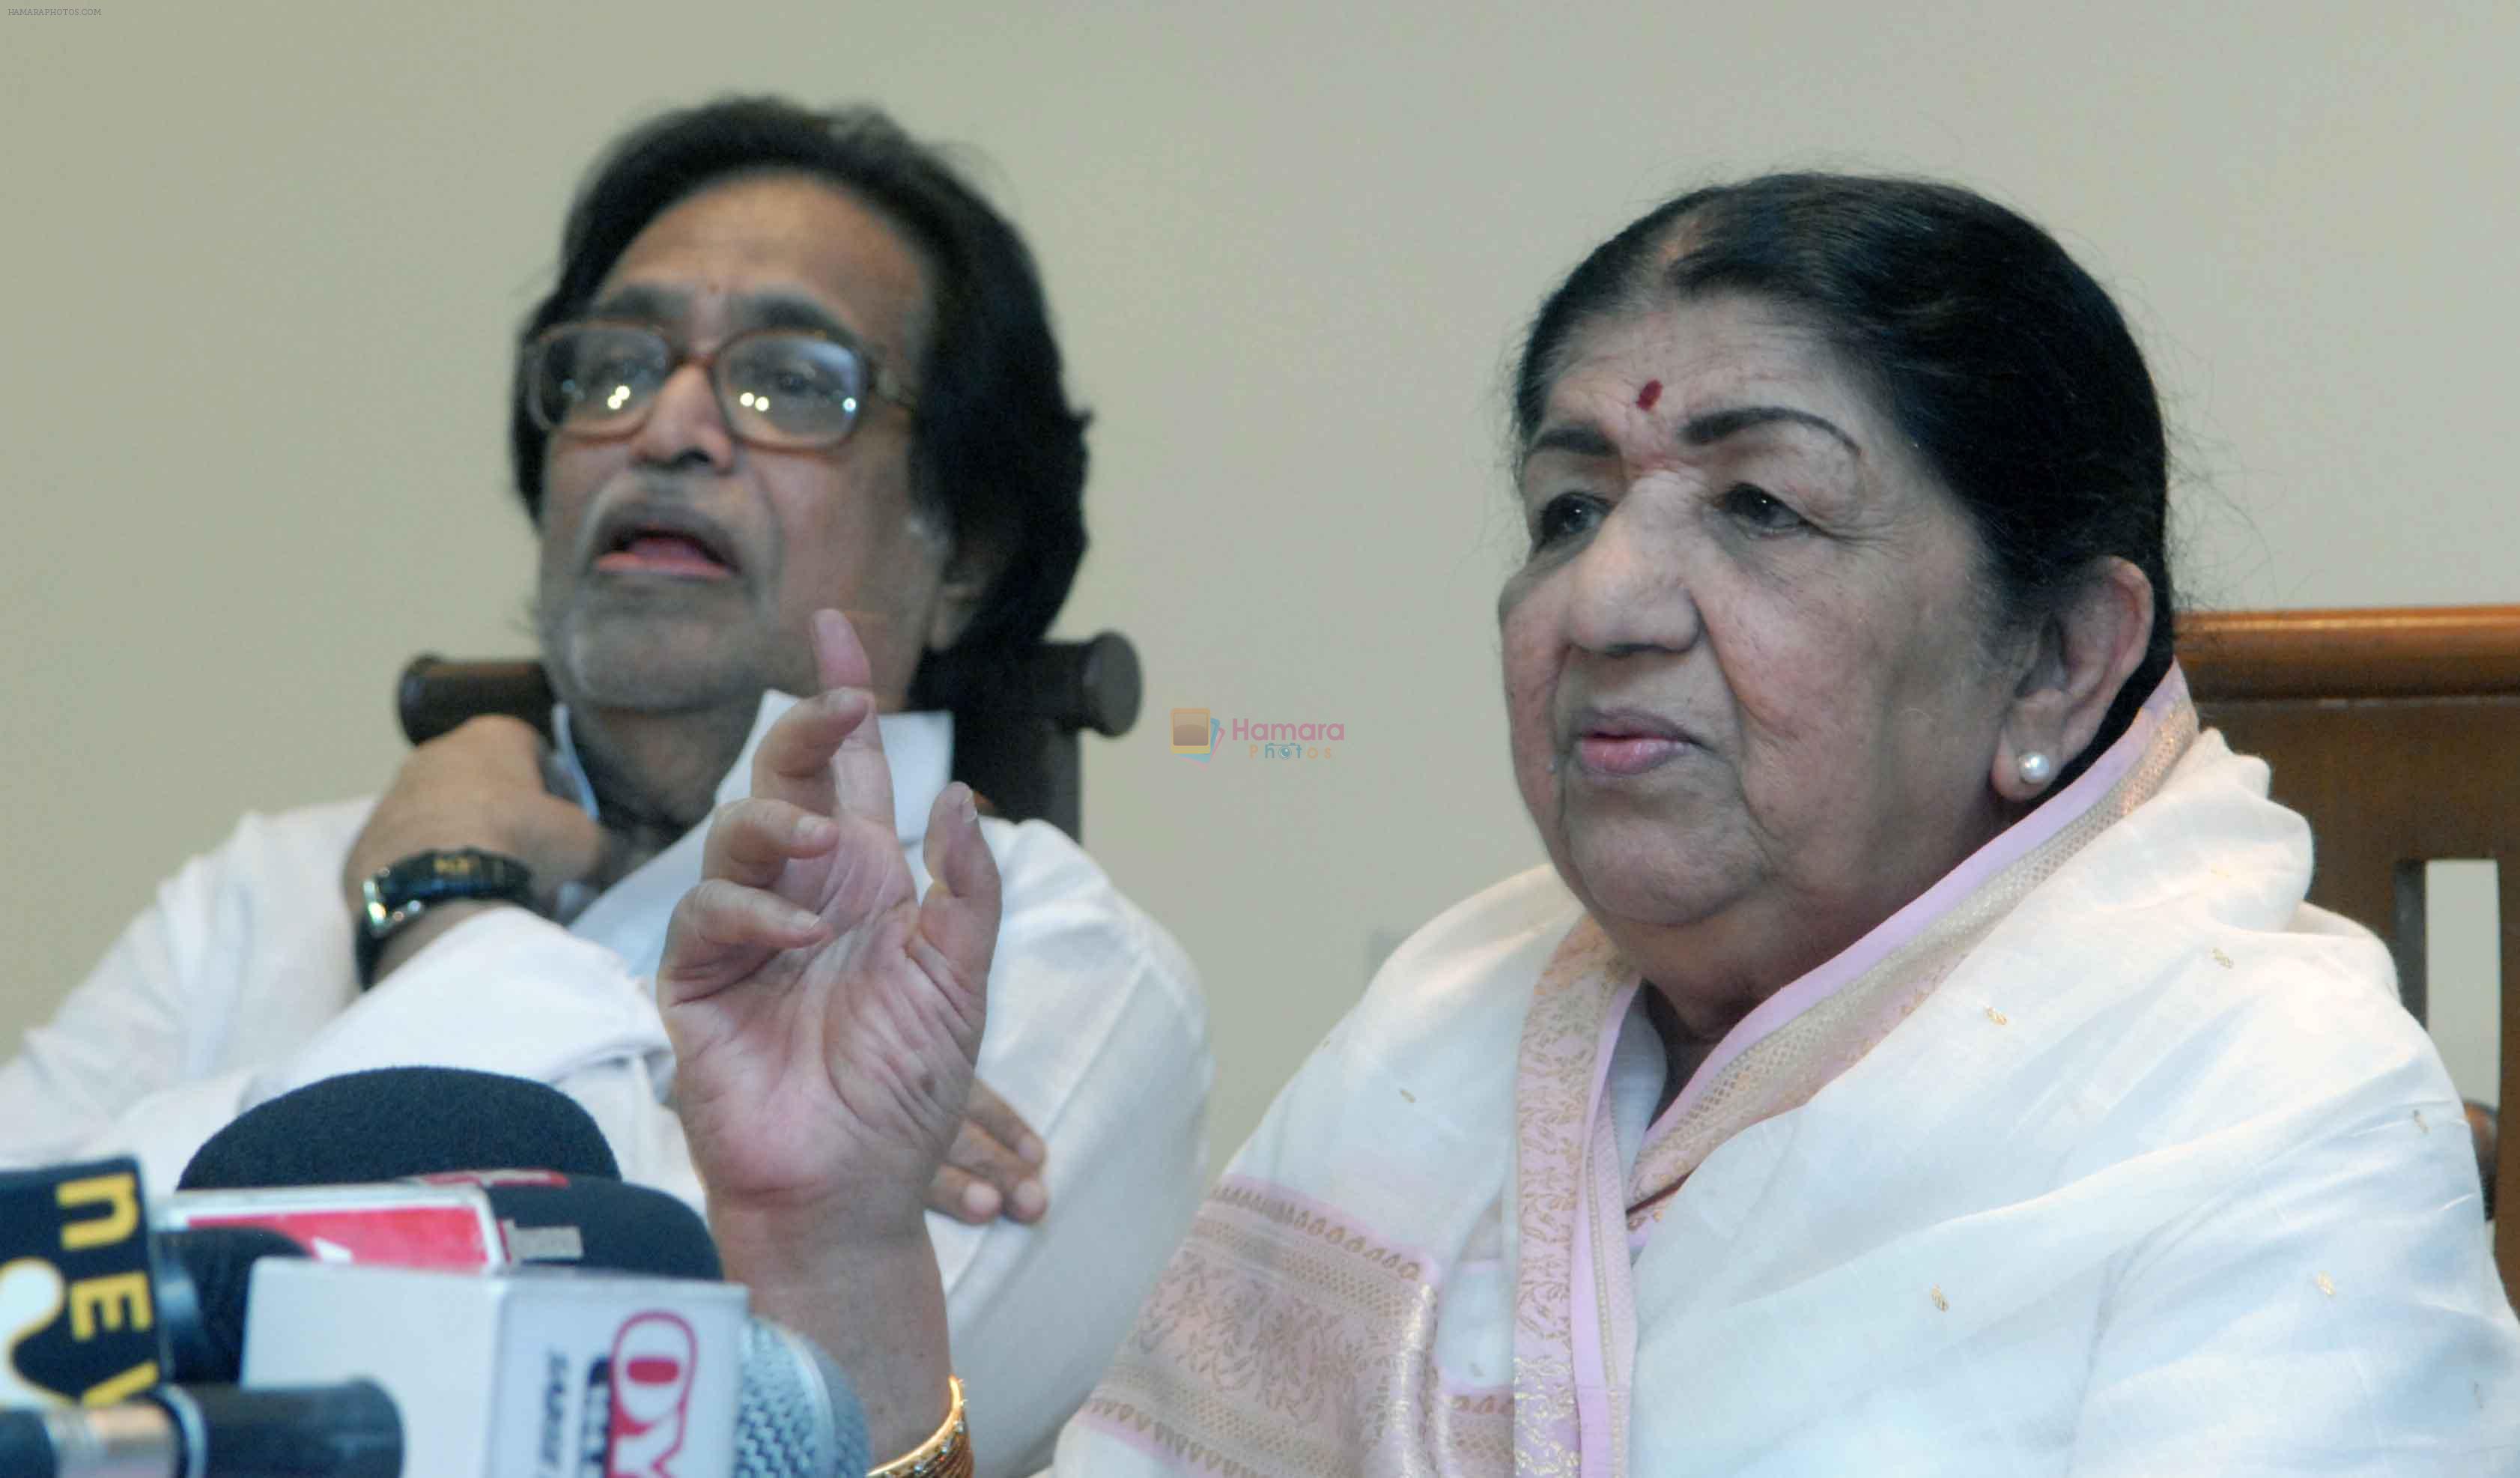 Lata Mangeshkar with Family in Press Conference at their residence Prabhu Kunj for Master Dinanath Award Announcement on 14th April 2012